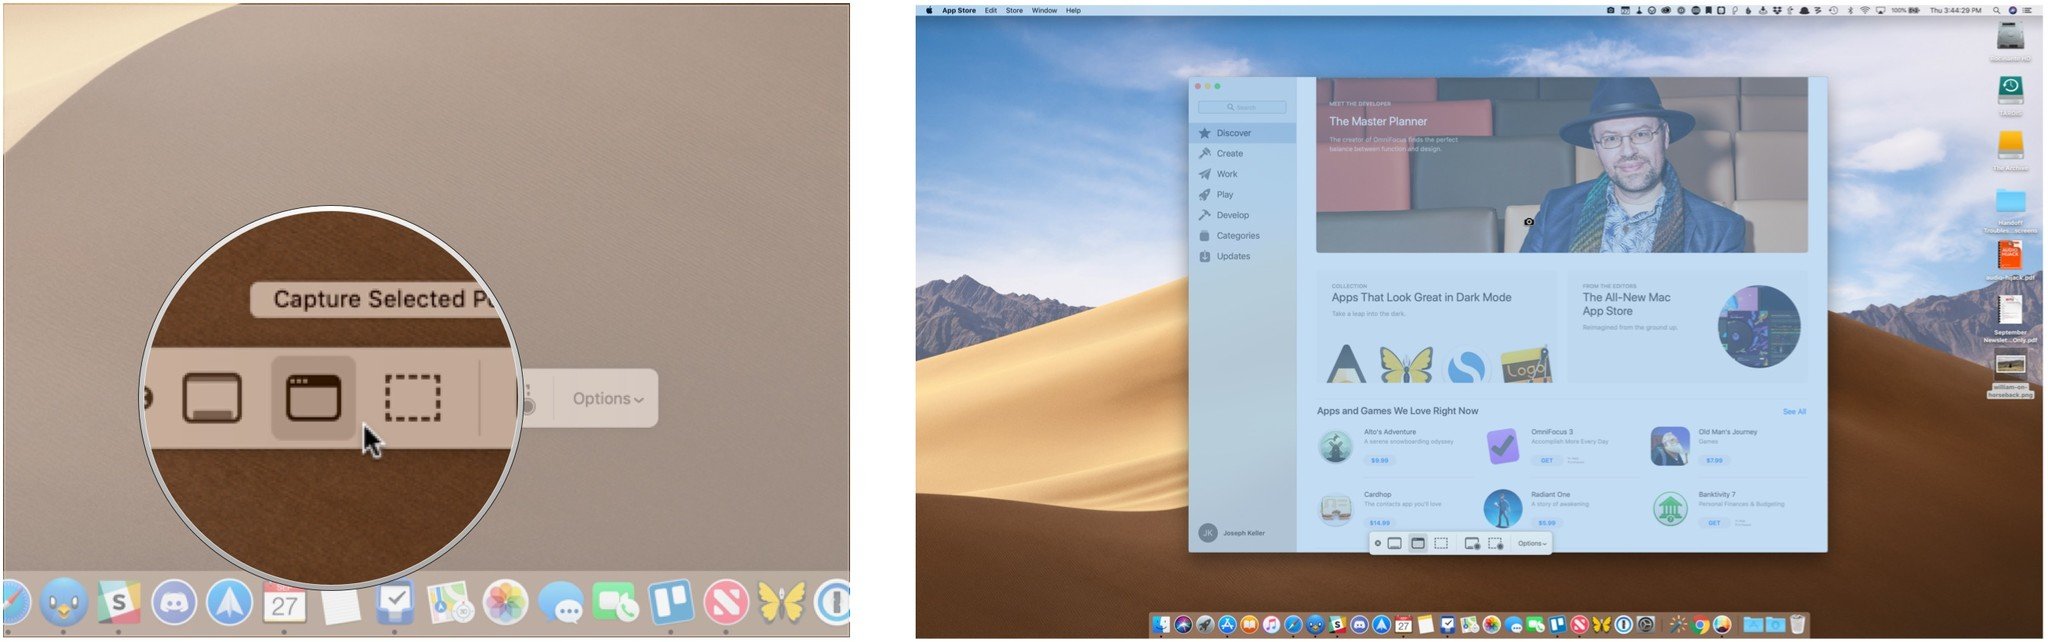 To take a screenshot on Mac, choose what you want to capture, Click area/window you want to capture